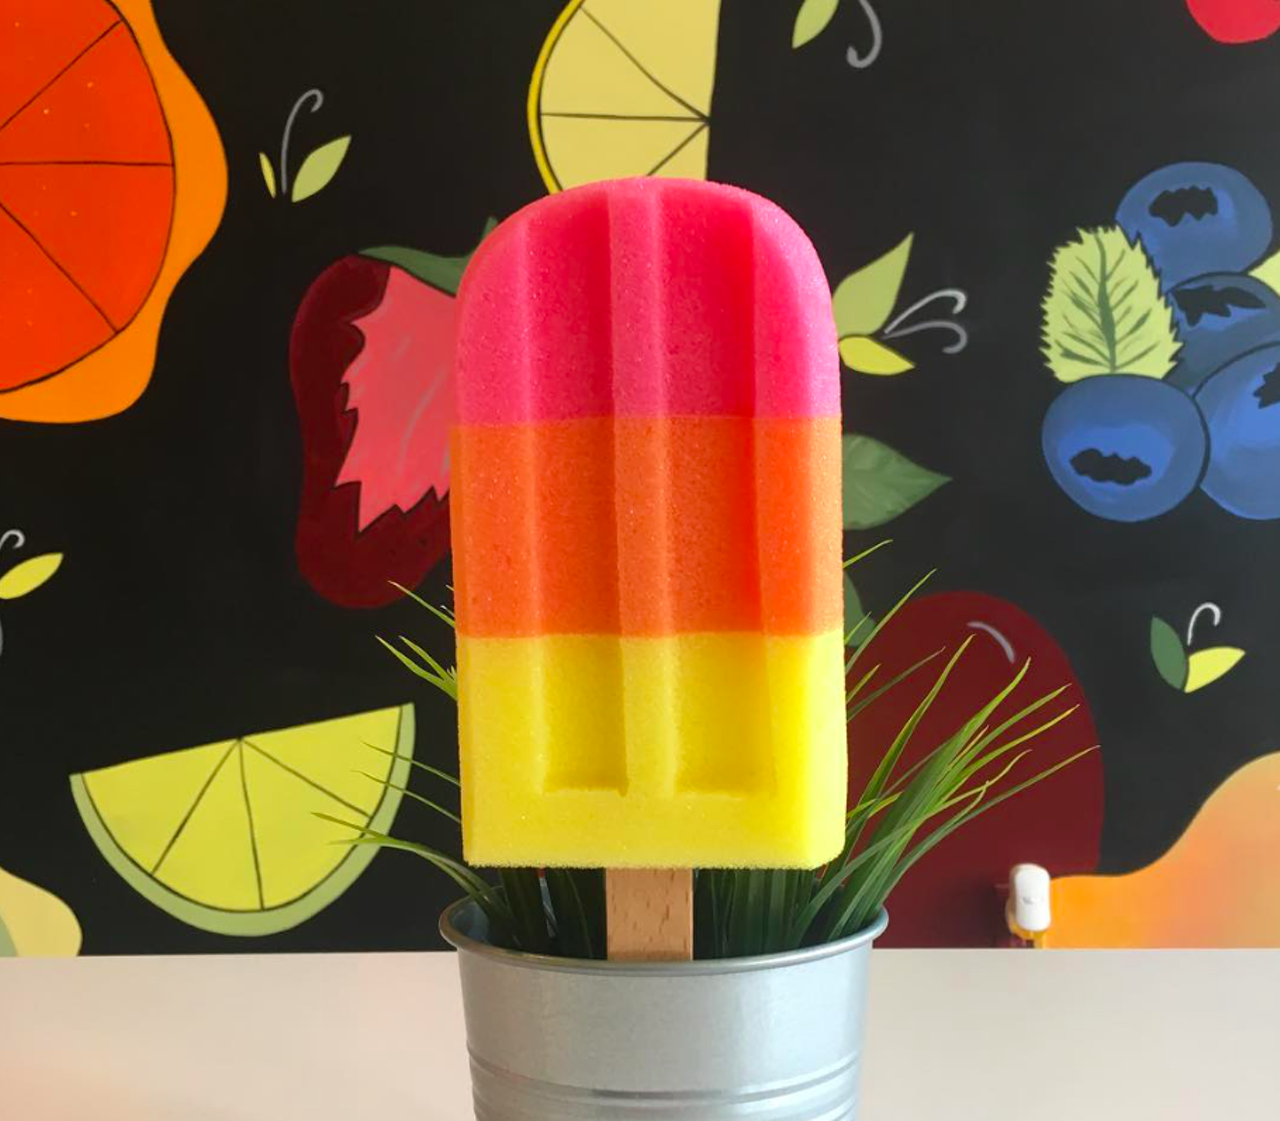 La Palette
12720 S. Orange Blossom Trail, Orlando
La Palette is an artisan “pop bar” that specializes in fruit-based flavors guaranteed to chill you out on a warm day. On top of the signature flavors on deck, they also serve dairy-free fruit pops, sugar-free pops and ice cream-based pops.